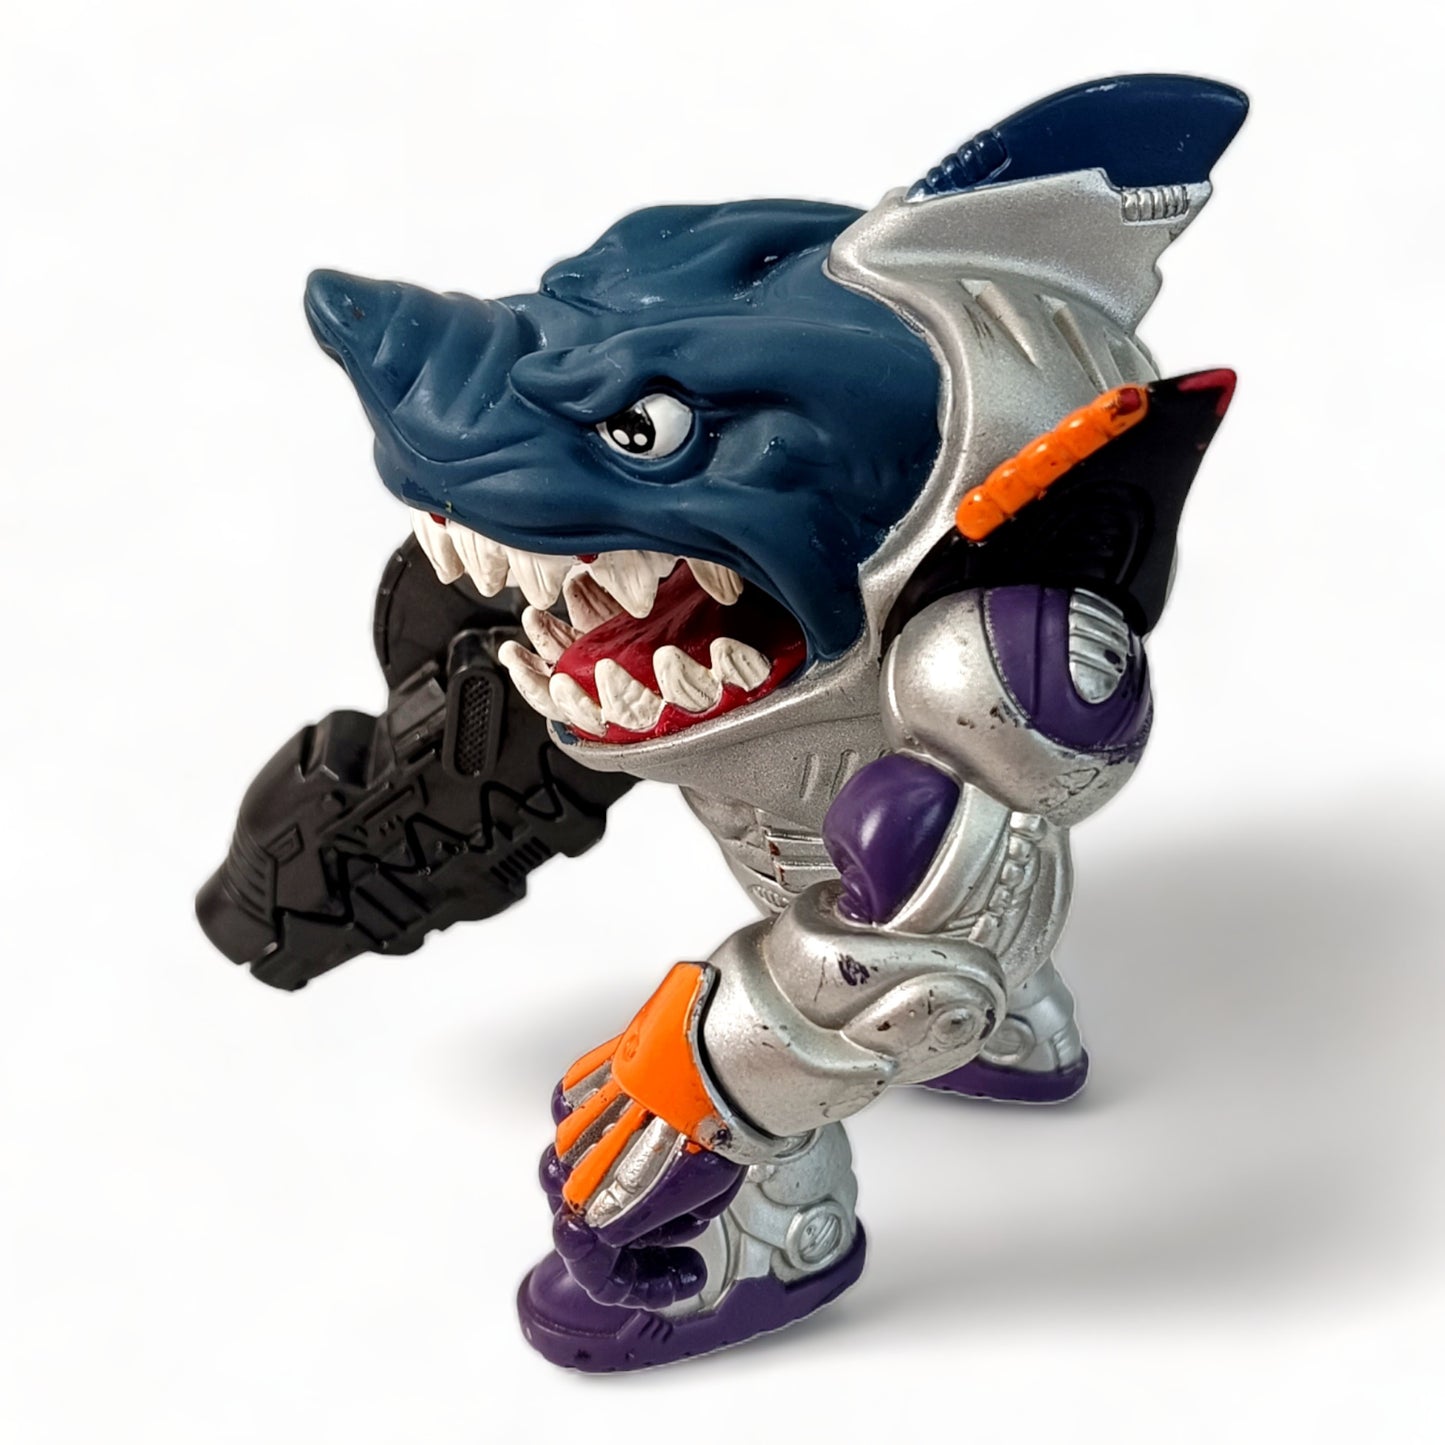 STREET SHARKS SPACE FORCE POWER ARM RIPSTER MATTEL 1996